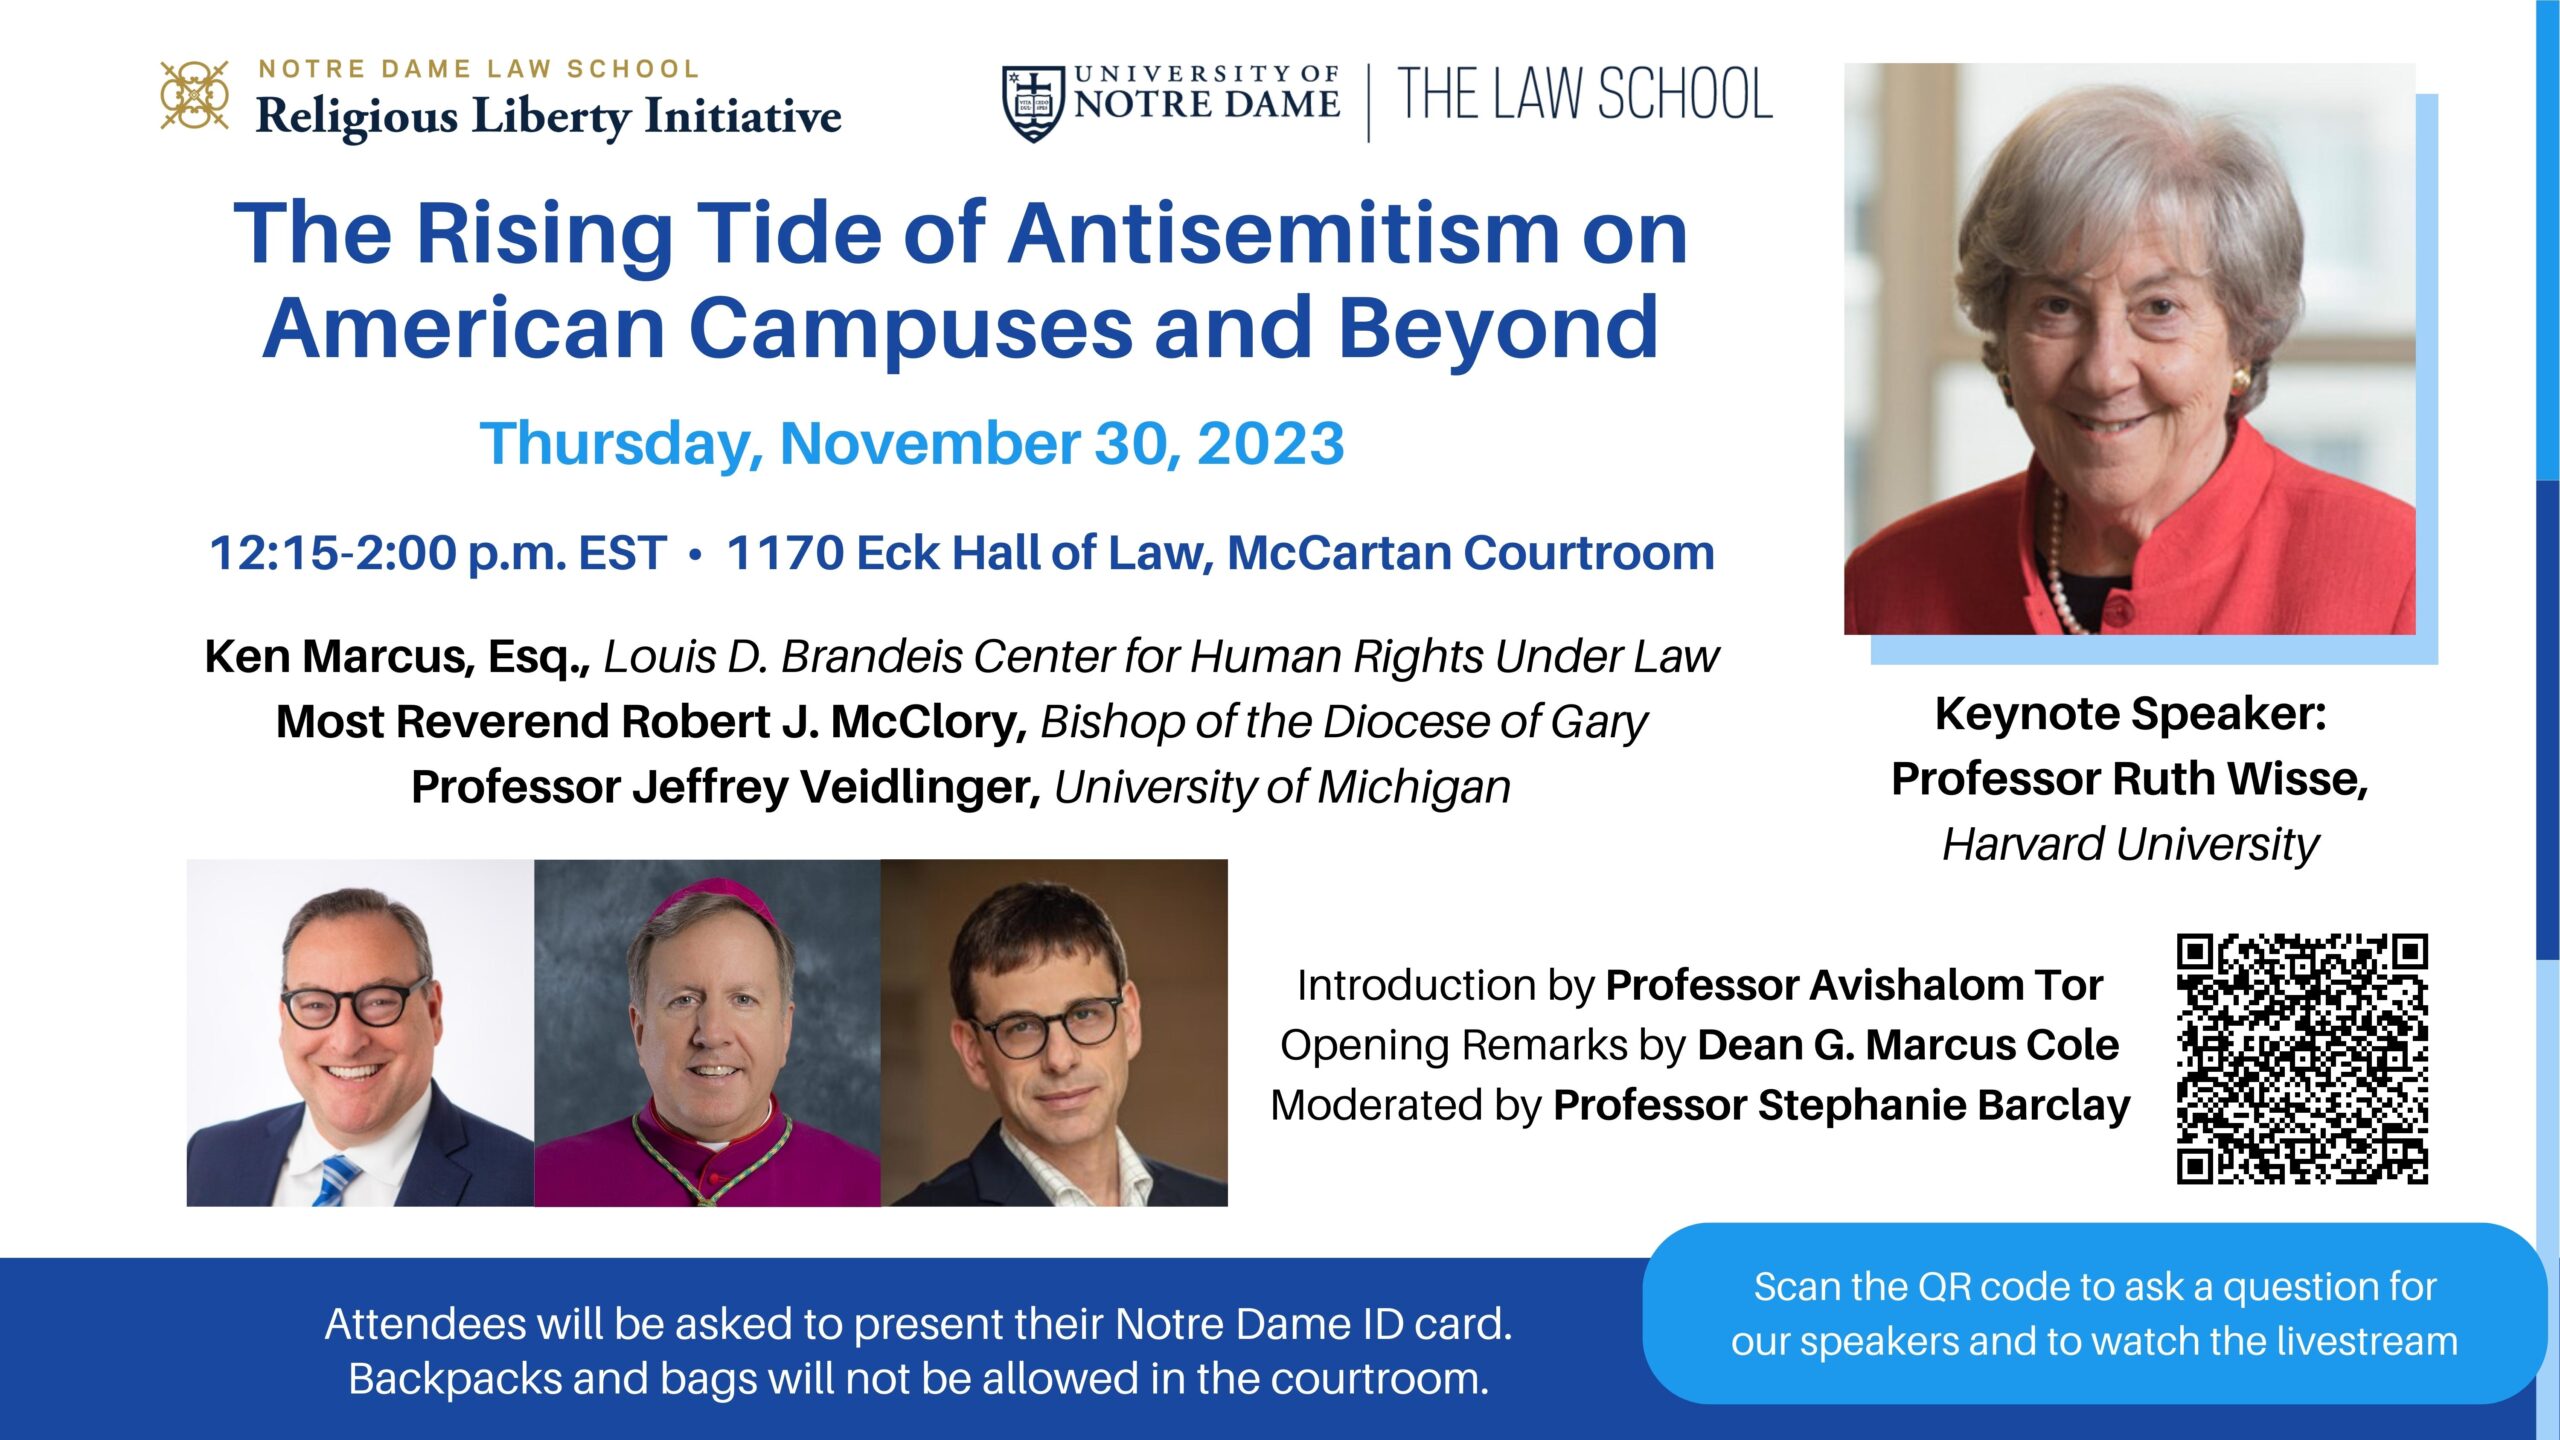 The Rising Tide of Antisemitism on American Campuses and Beyond